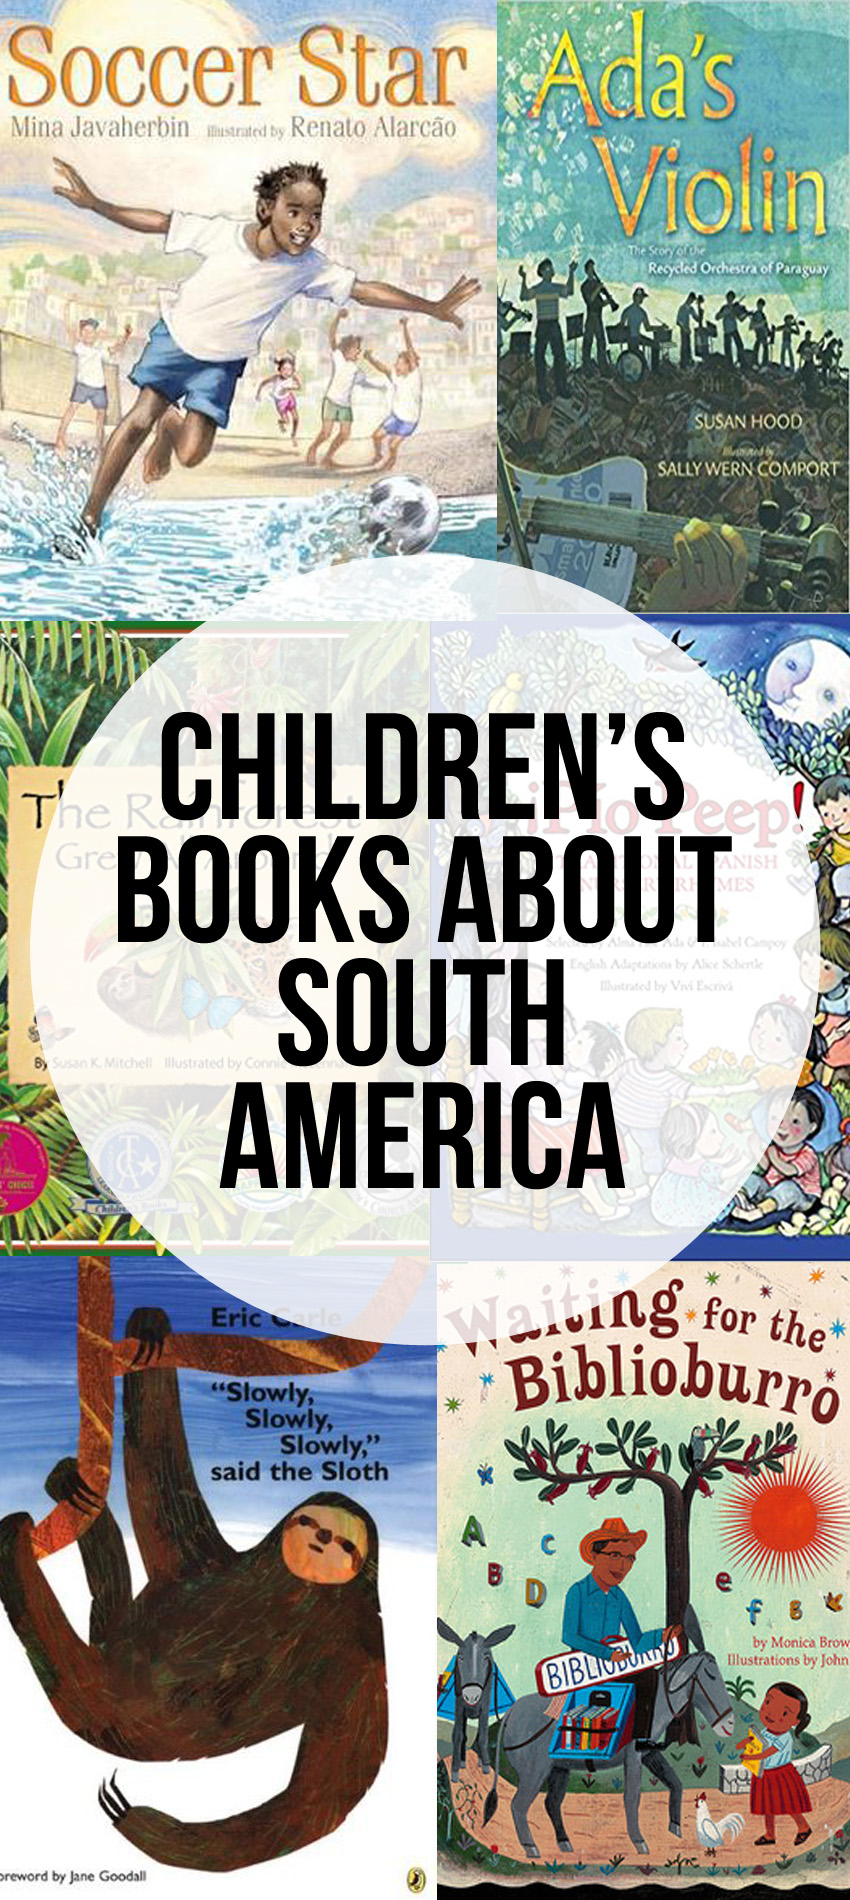 Picture Books About South America